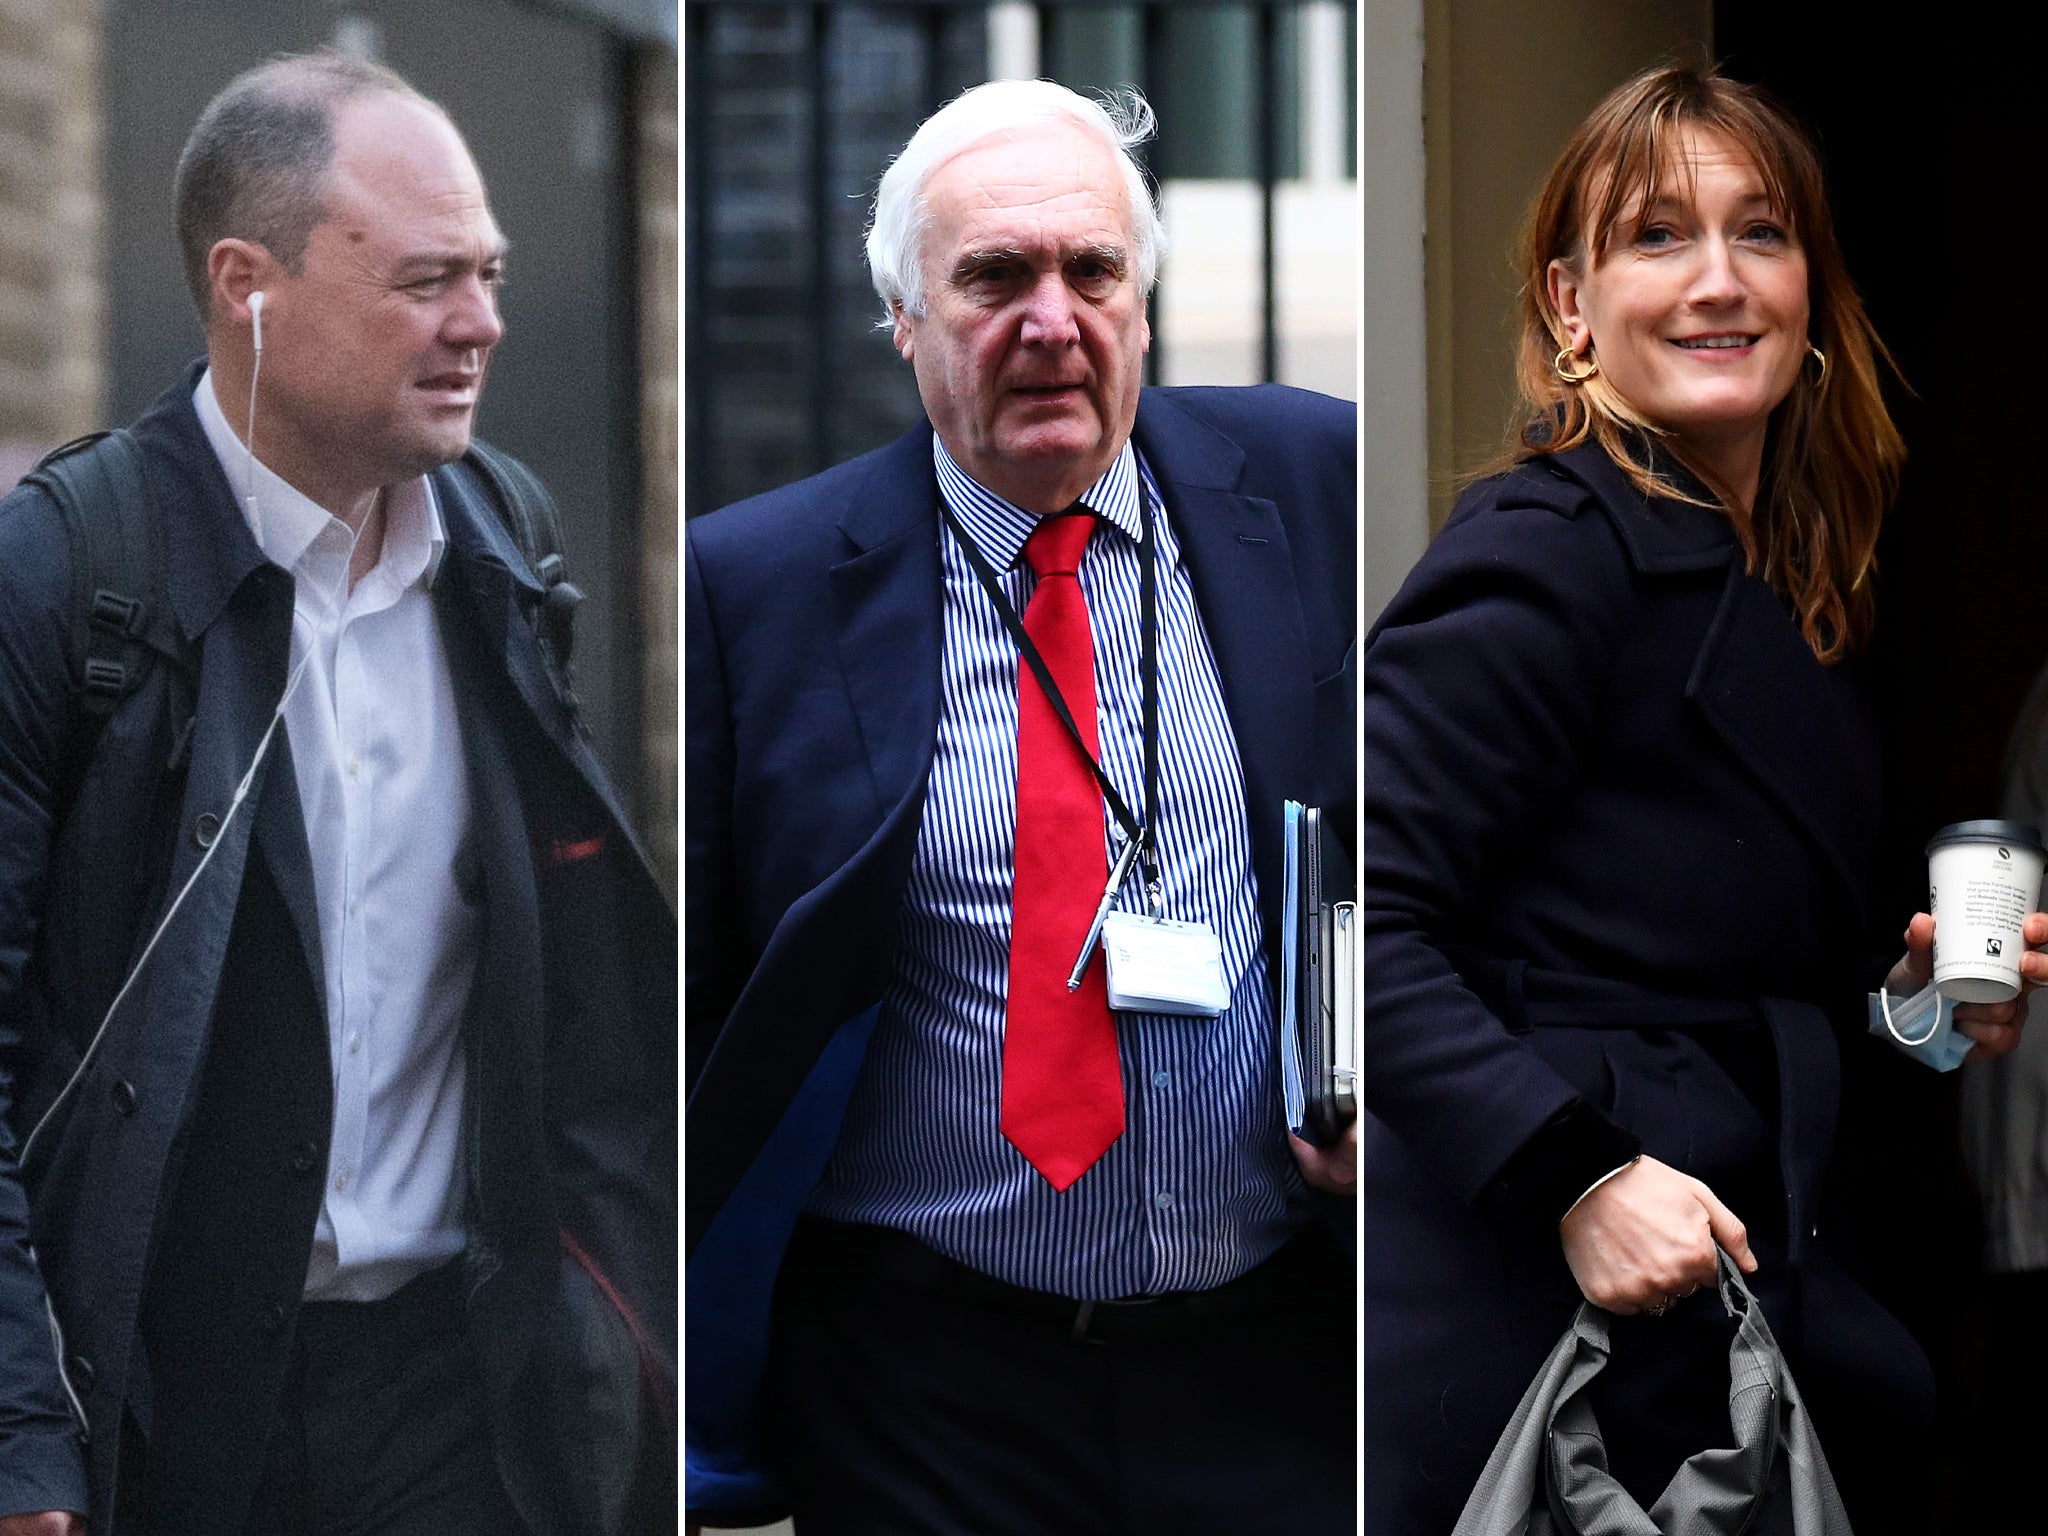 James Slack, Sir Edward Lister and Allegra Stratton all have top roles in Downing Street